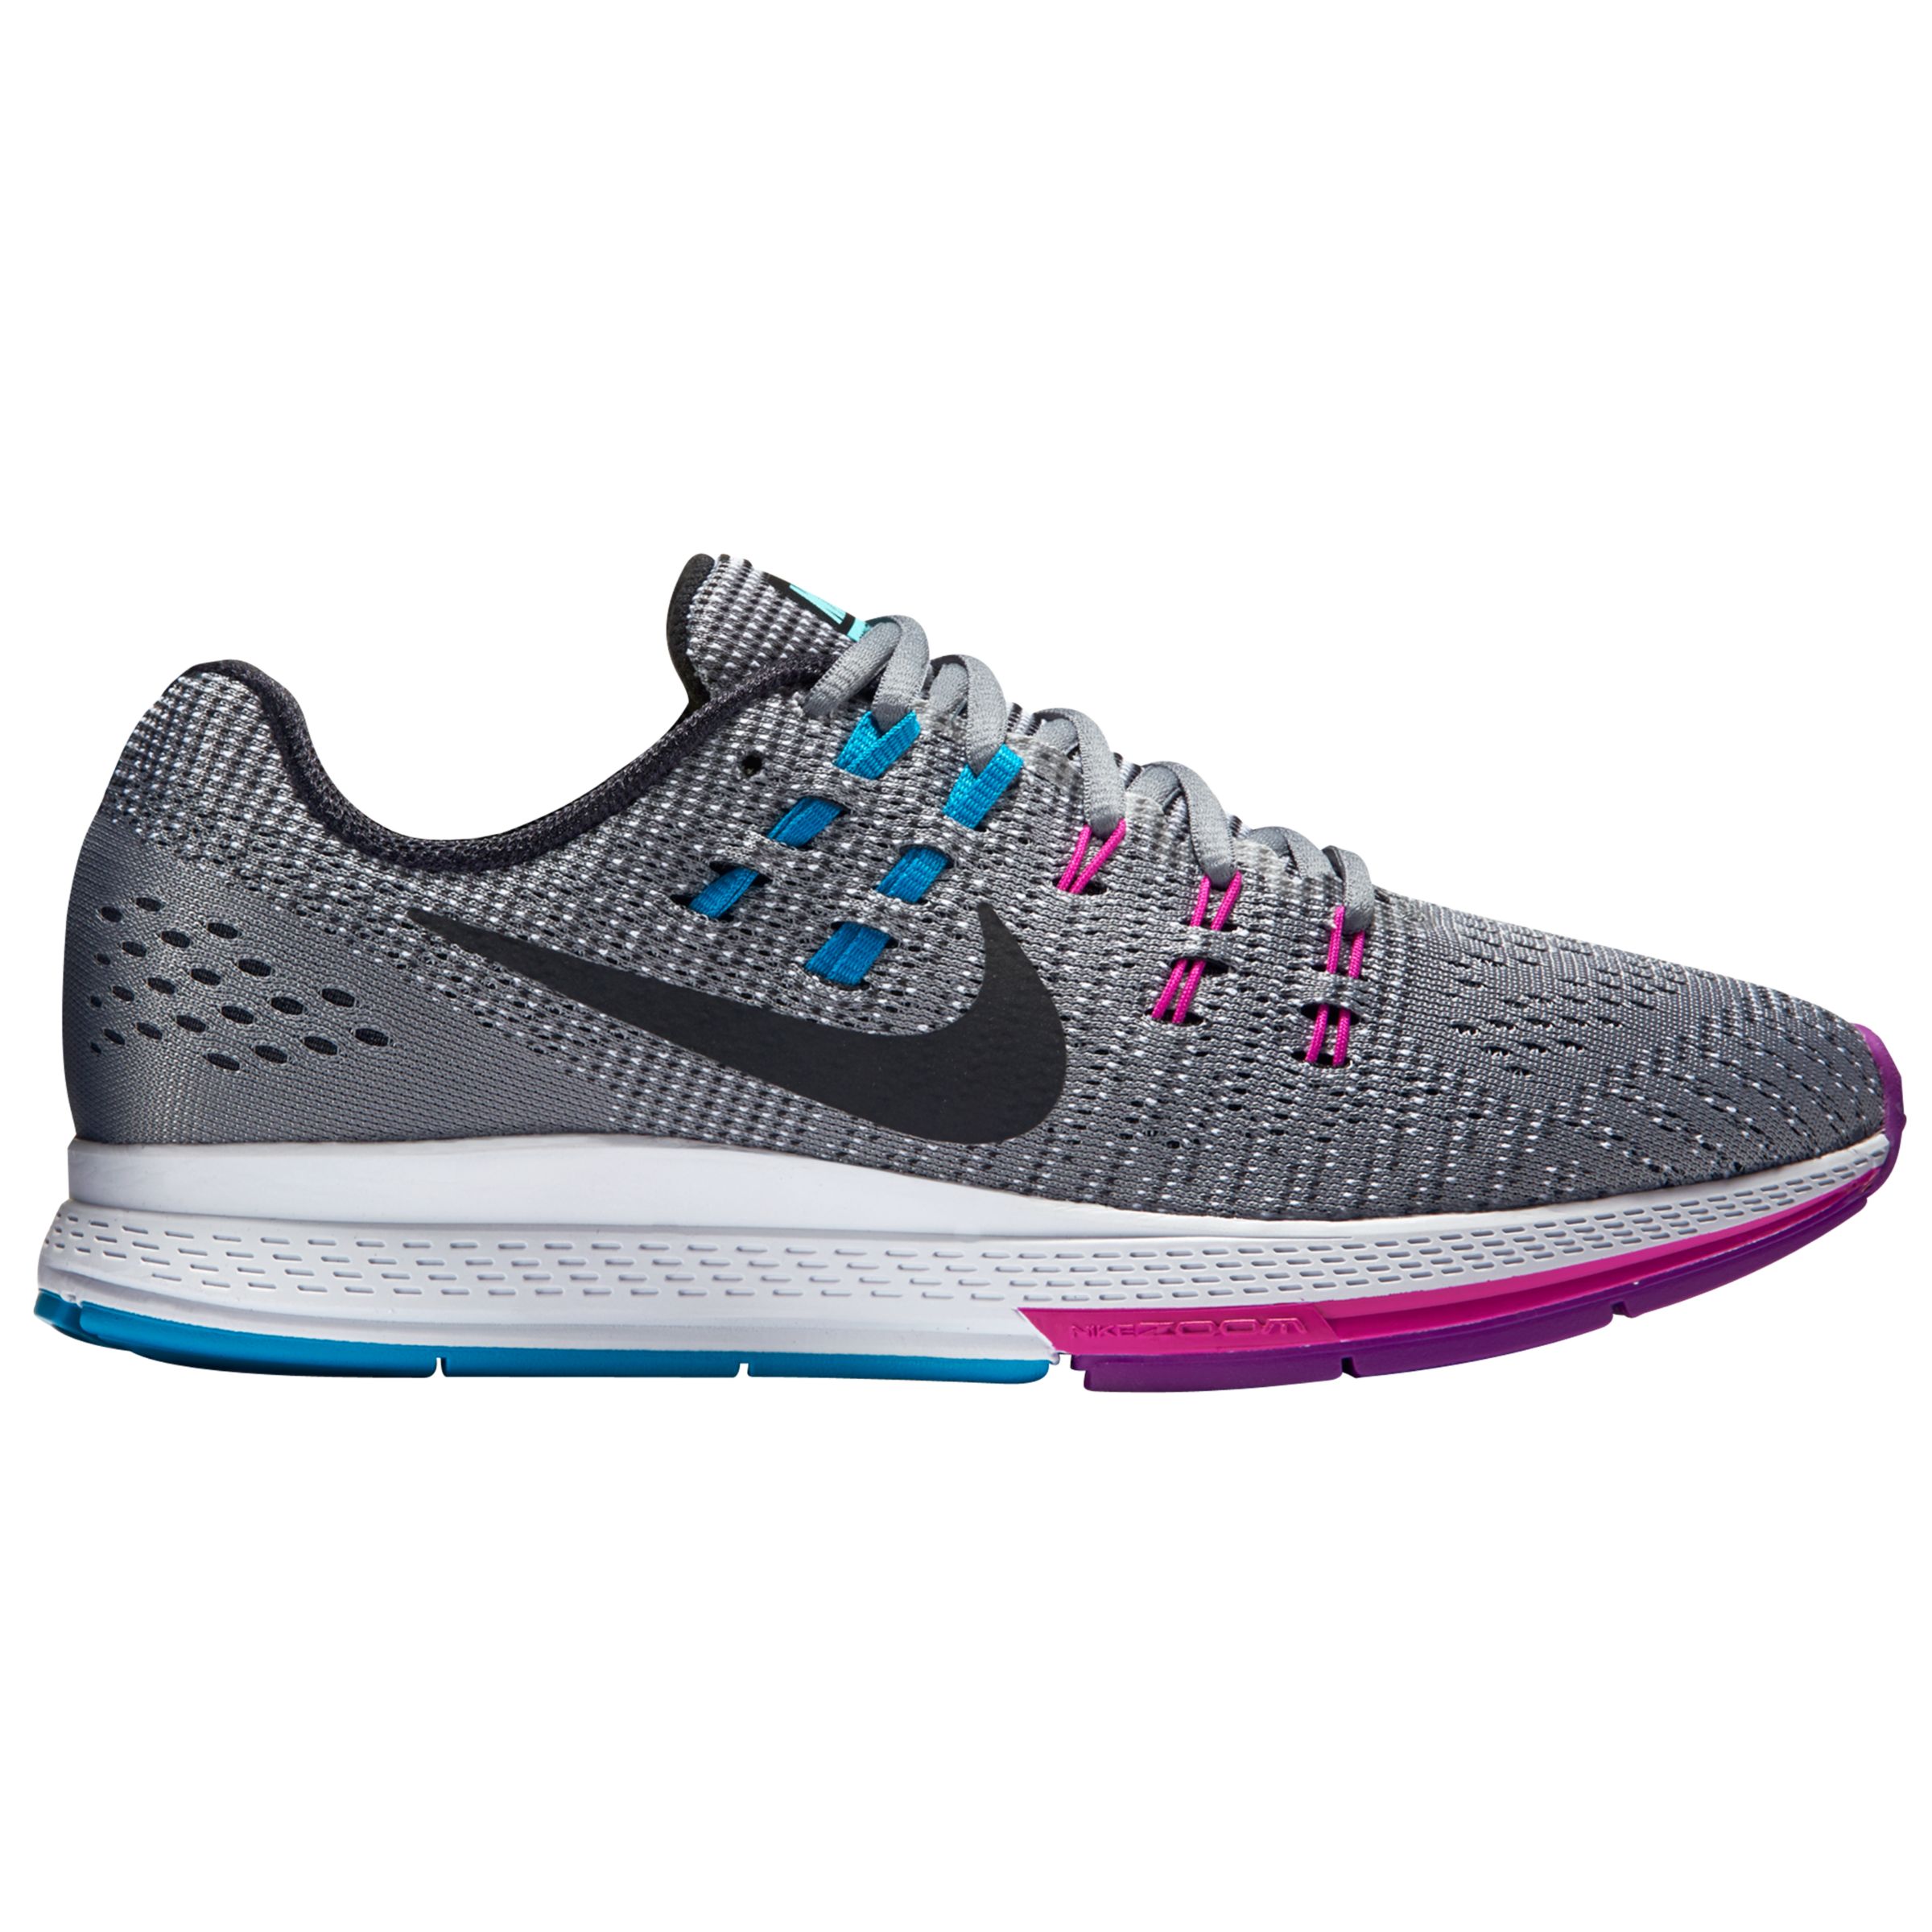 nike zoom structure 19 women's